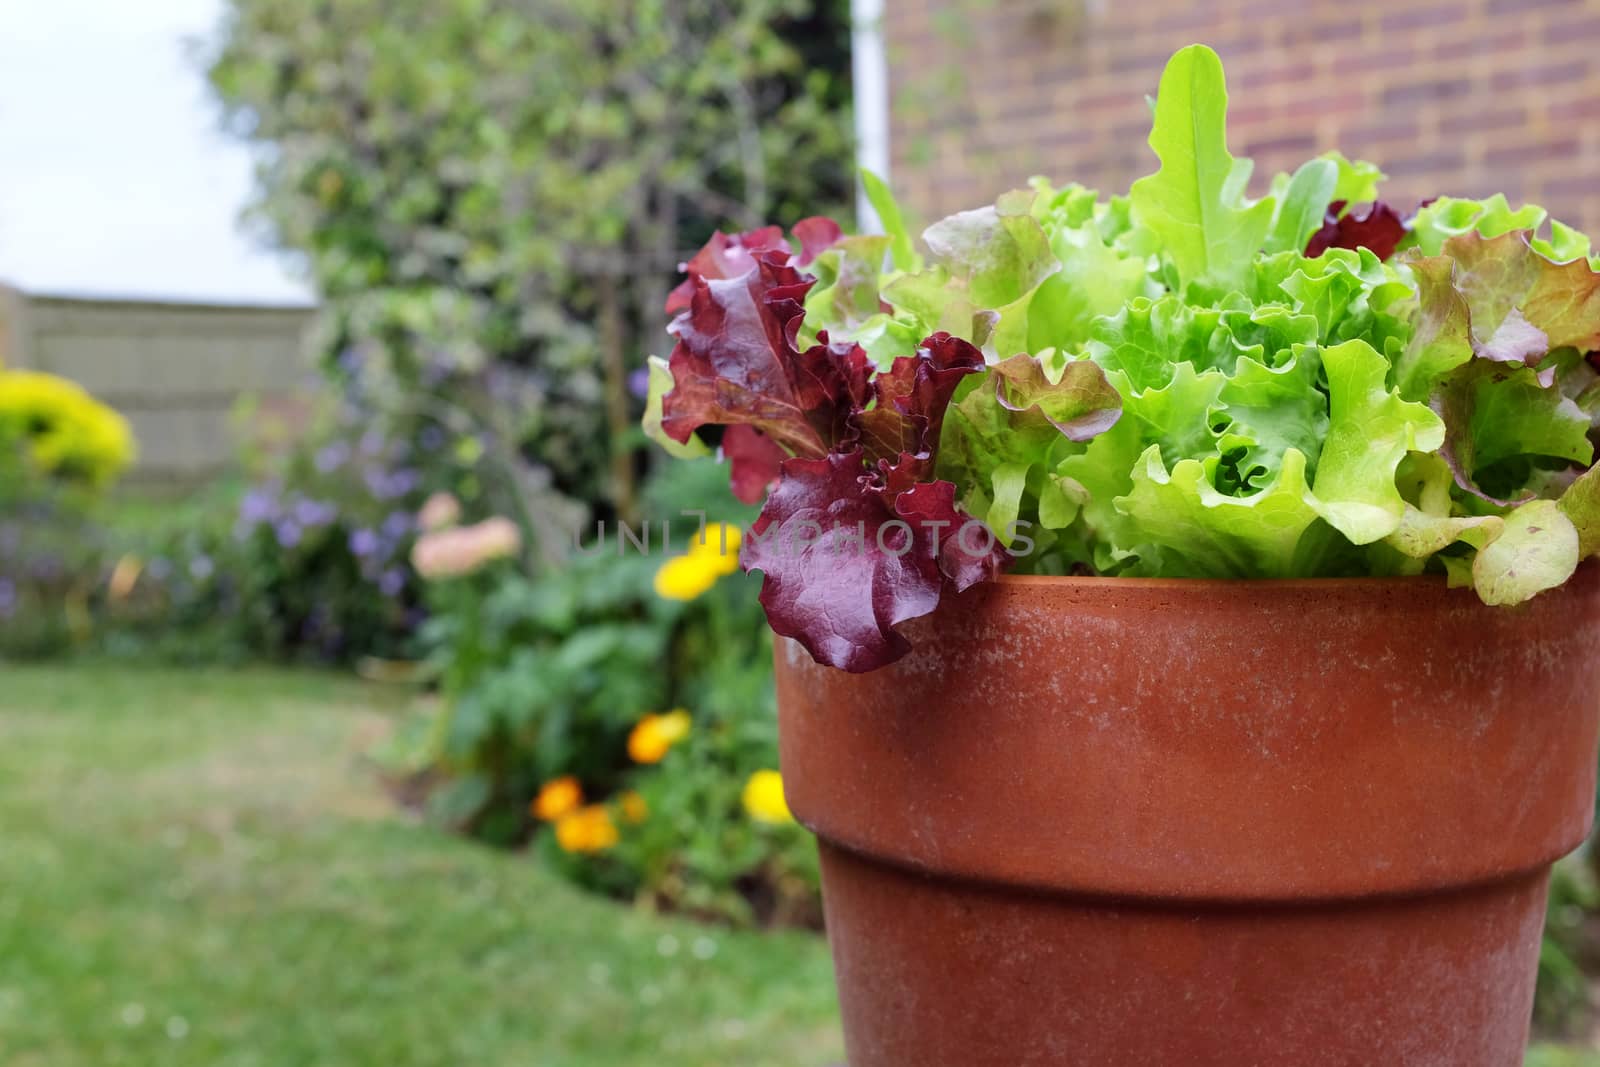 Mixed red and green salad leaves growing in a terracotta flower pot, in selective focus against a colourful garden